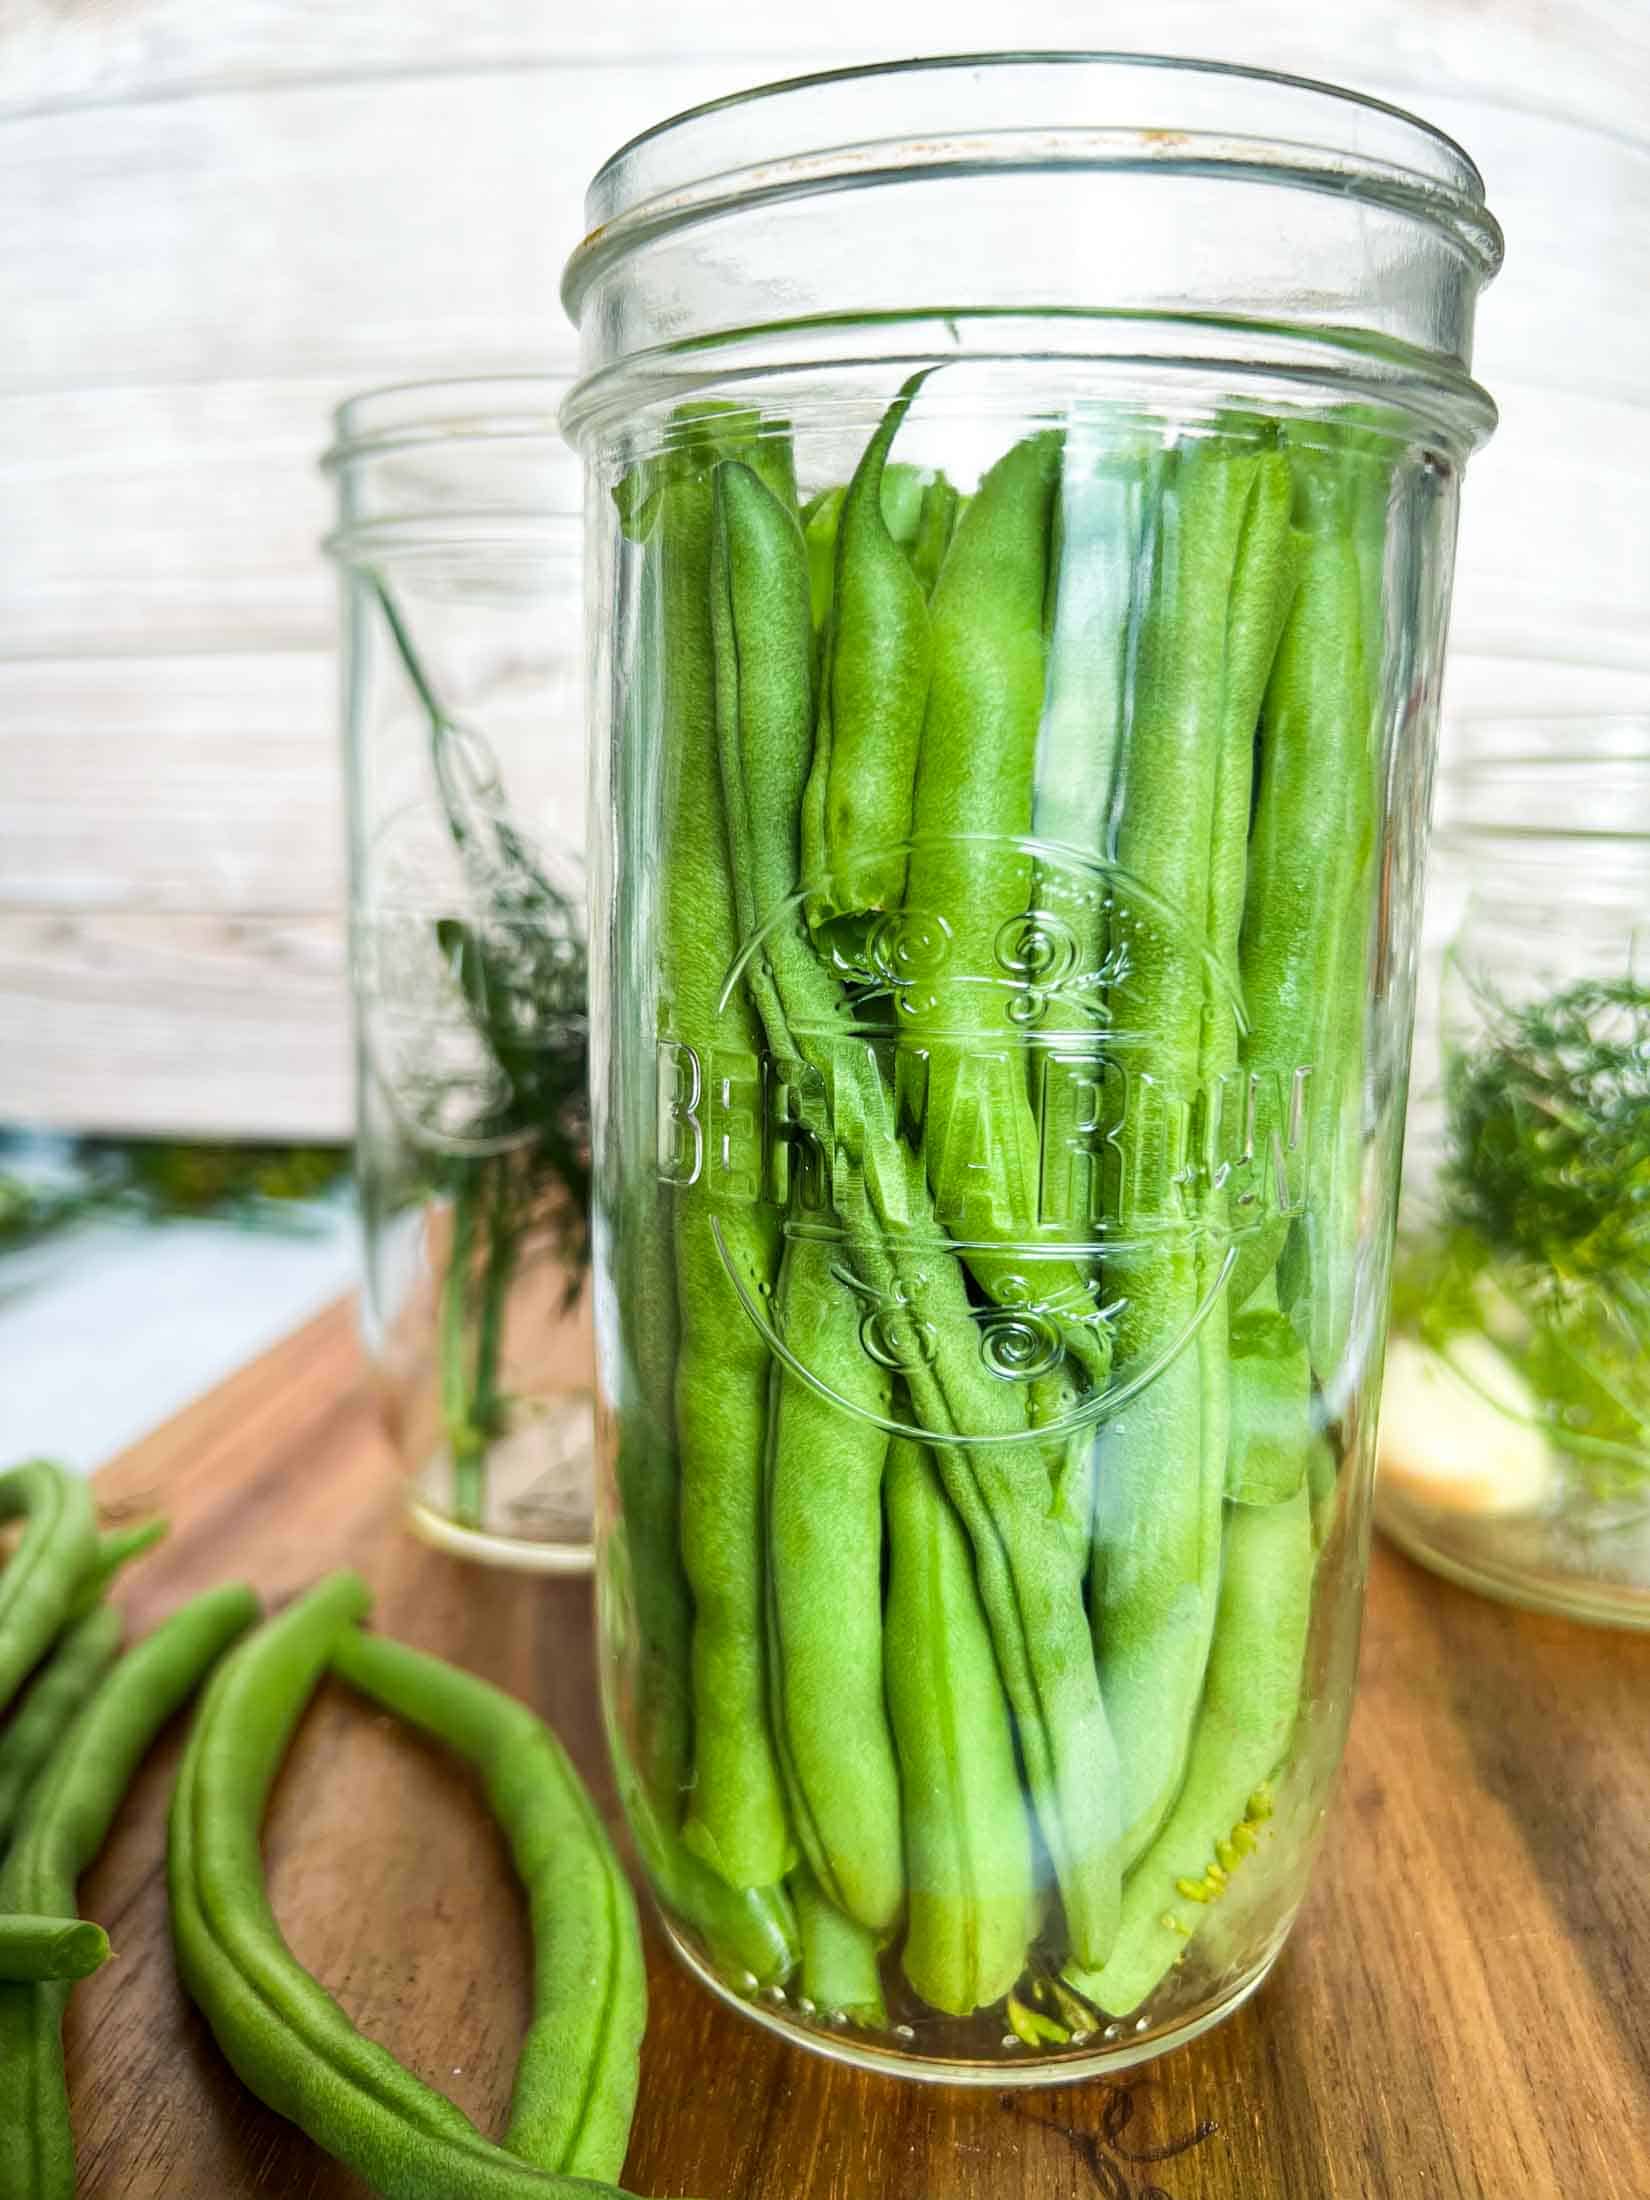 Green beans standing vertically in a pint and a half sized jar.